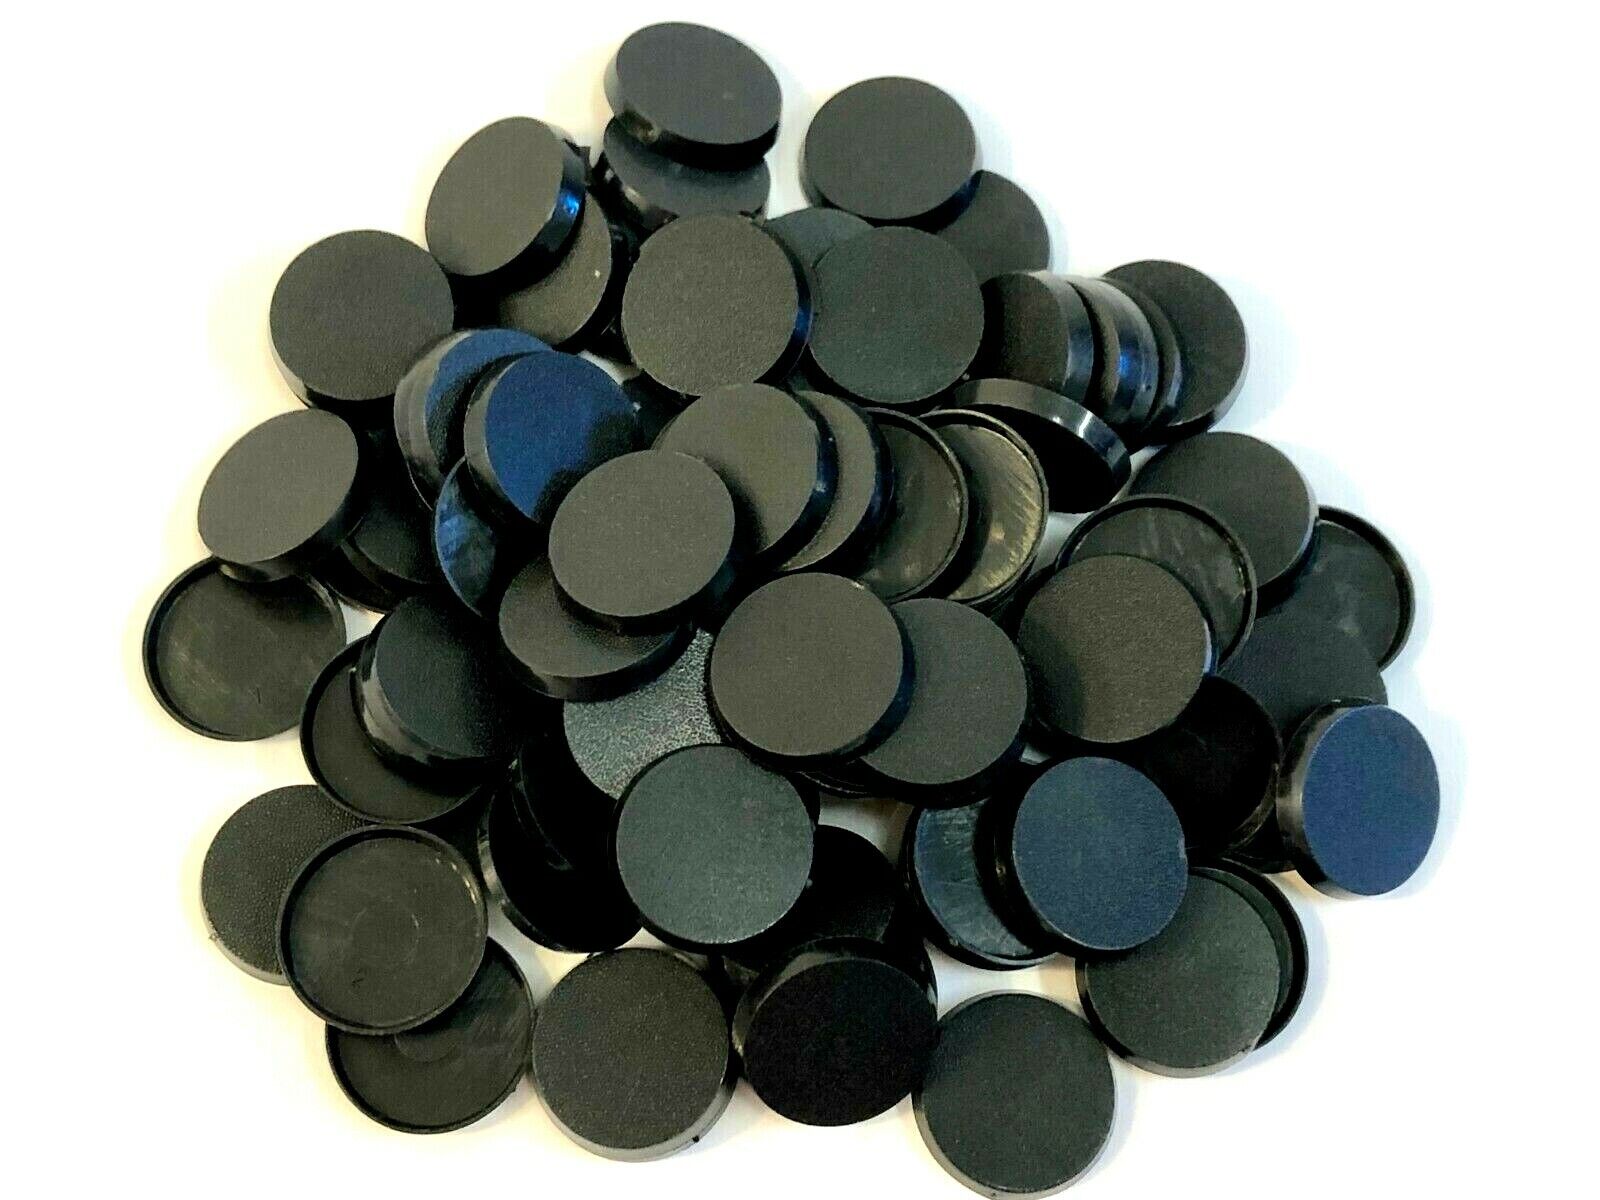 Lot Of 100 28.5mm Round Bases For Warhammer 40k + AoS Games Workshop Bitz  Unbranded Does not apply